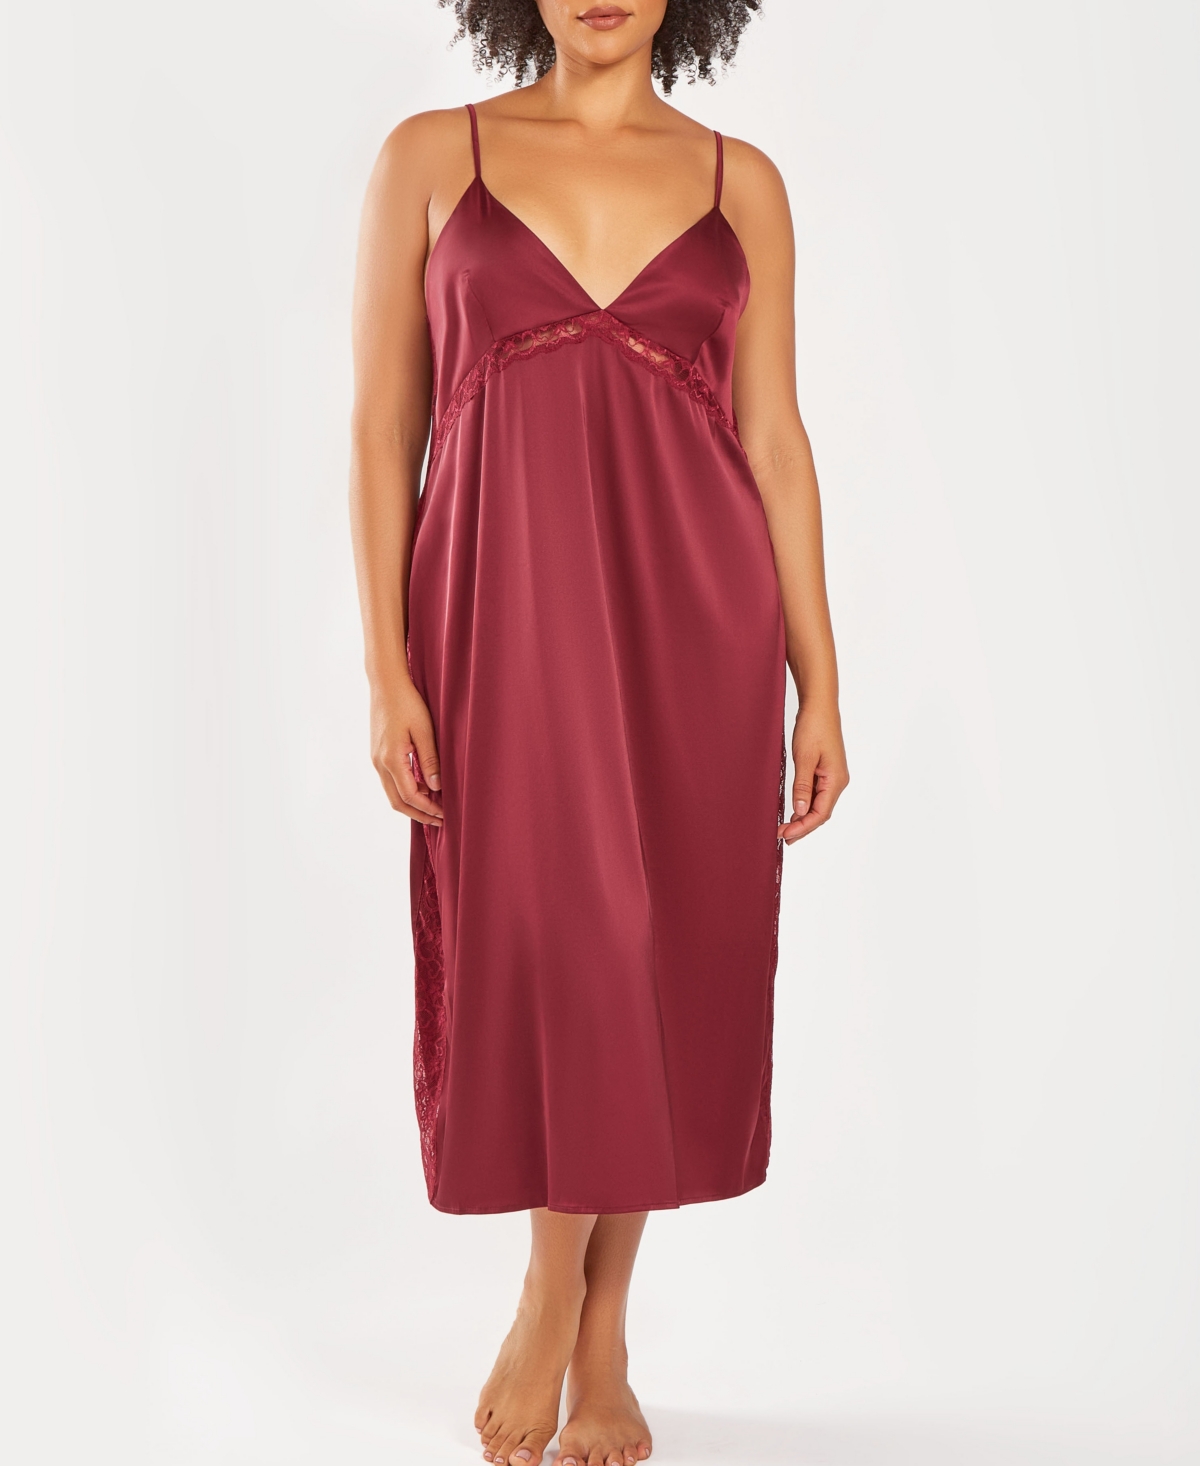 Plus Size Silky Open Back Nightgown with Lace Trims - Wine